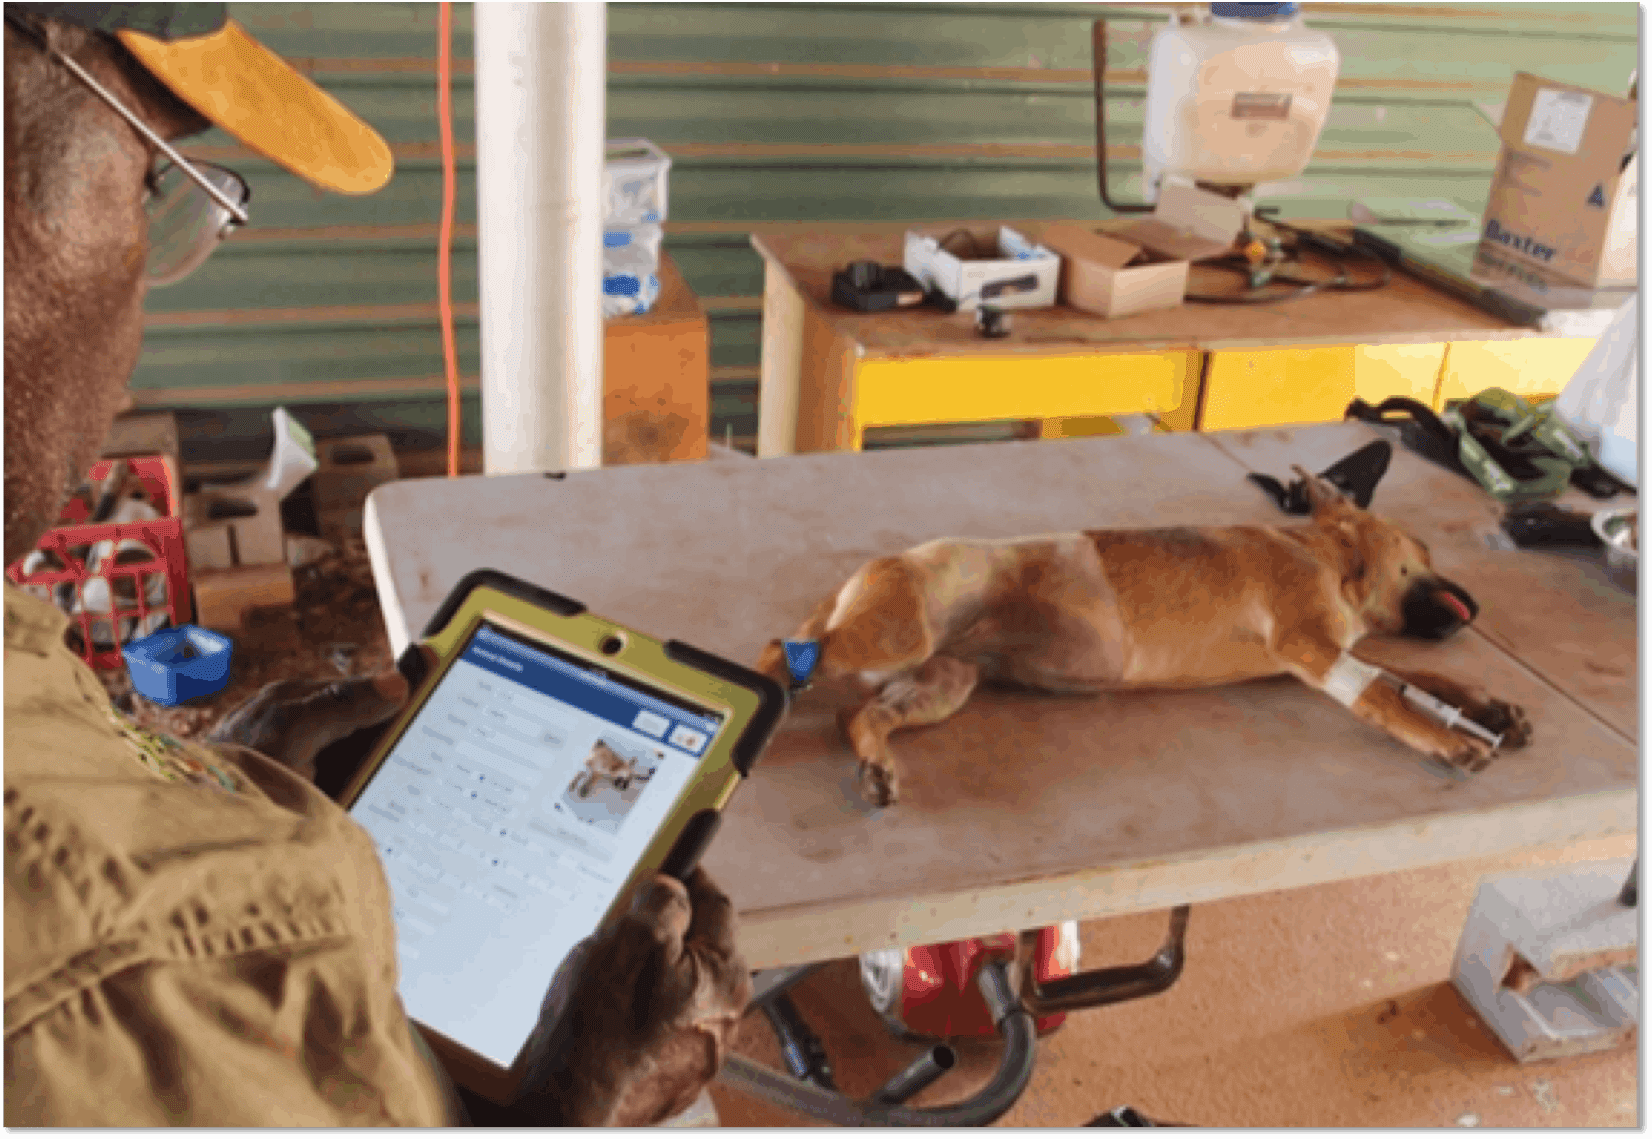 The AMRRIC App has been designed to make it easier to keep good records for remote Indigenous community animal health and management programs. Photo courtesy AMRRIC width=